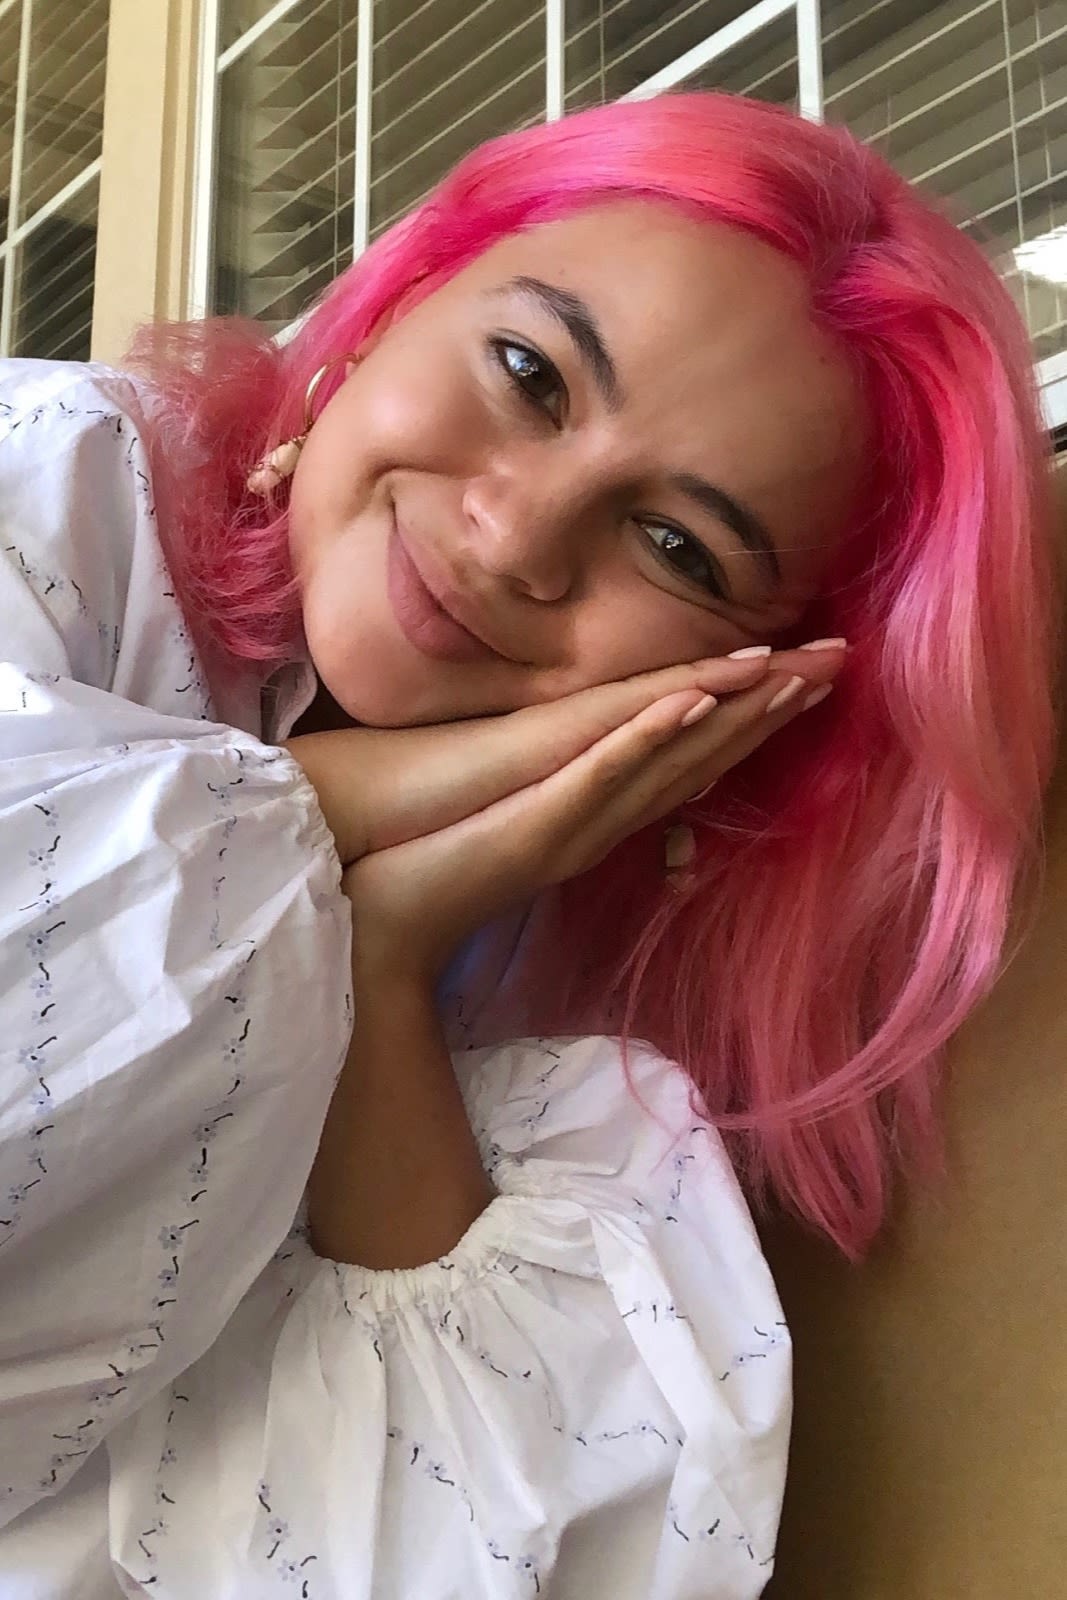 How To Get Bubblegum Pink Hair, The Shade Celebrities Love